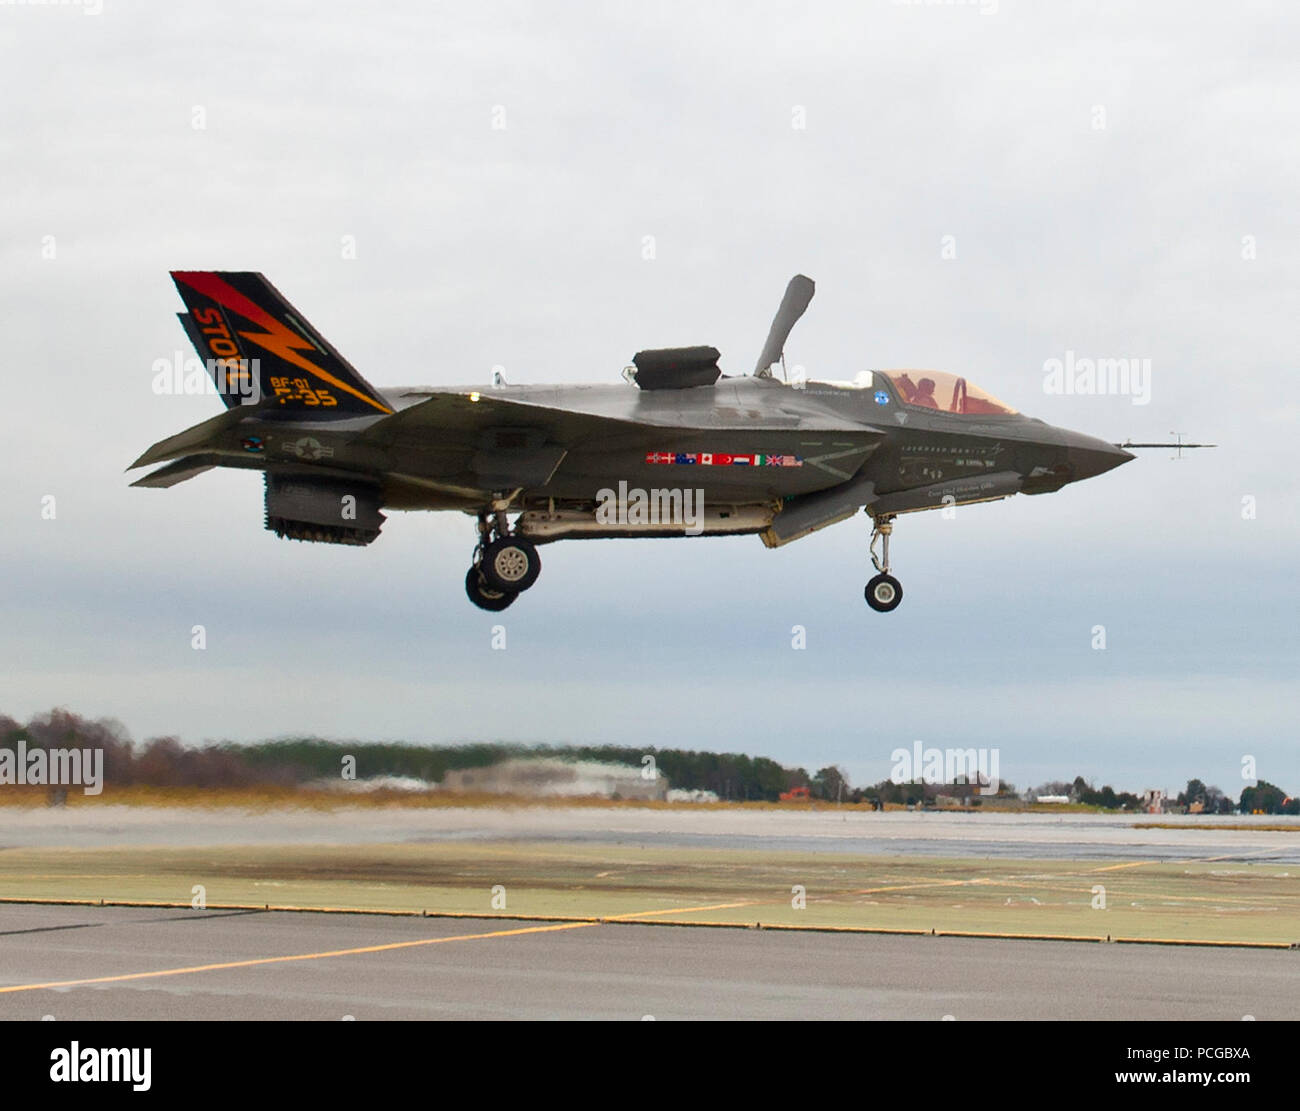 PATUXENT RIVER, Md. (Dec. 7, 2012) Maj. C. R. Clift, a Marine Corps test pilot, flies BF-1, an F-35B Lightning II, on a short take off and vertical landing mode mission. The flight marked the 1000th developmental test flight for the F-35B Lightning II in the program's program's system development and demonstration phase. The F-35B is the variant of the Lightning II designed for use by the U.S. Marine Corps, as well as F-35 international partners in the United Kingdom and Italy. The F-35B is capable of short takeoffs and vertical landings to enable air power projection from amphibious ships, sk Stock Photo